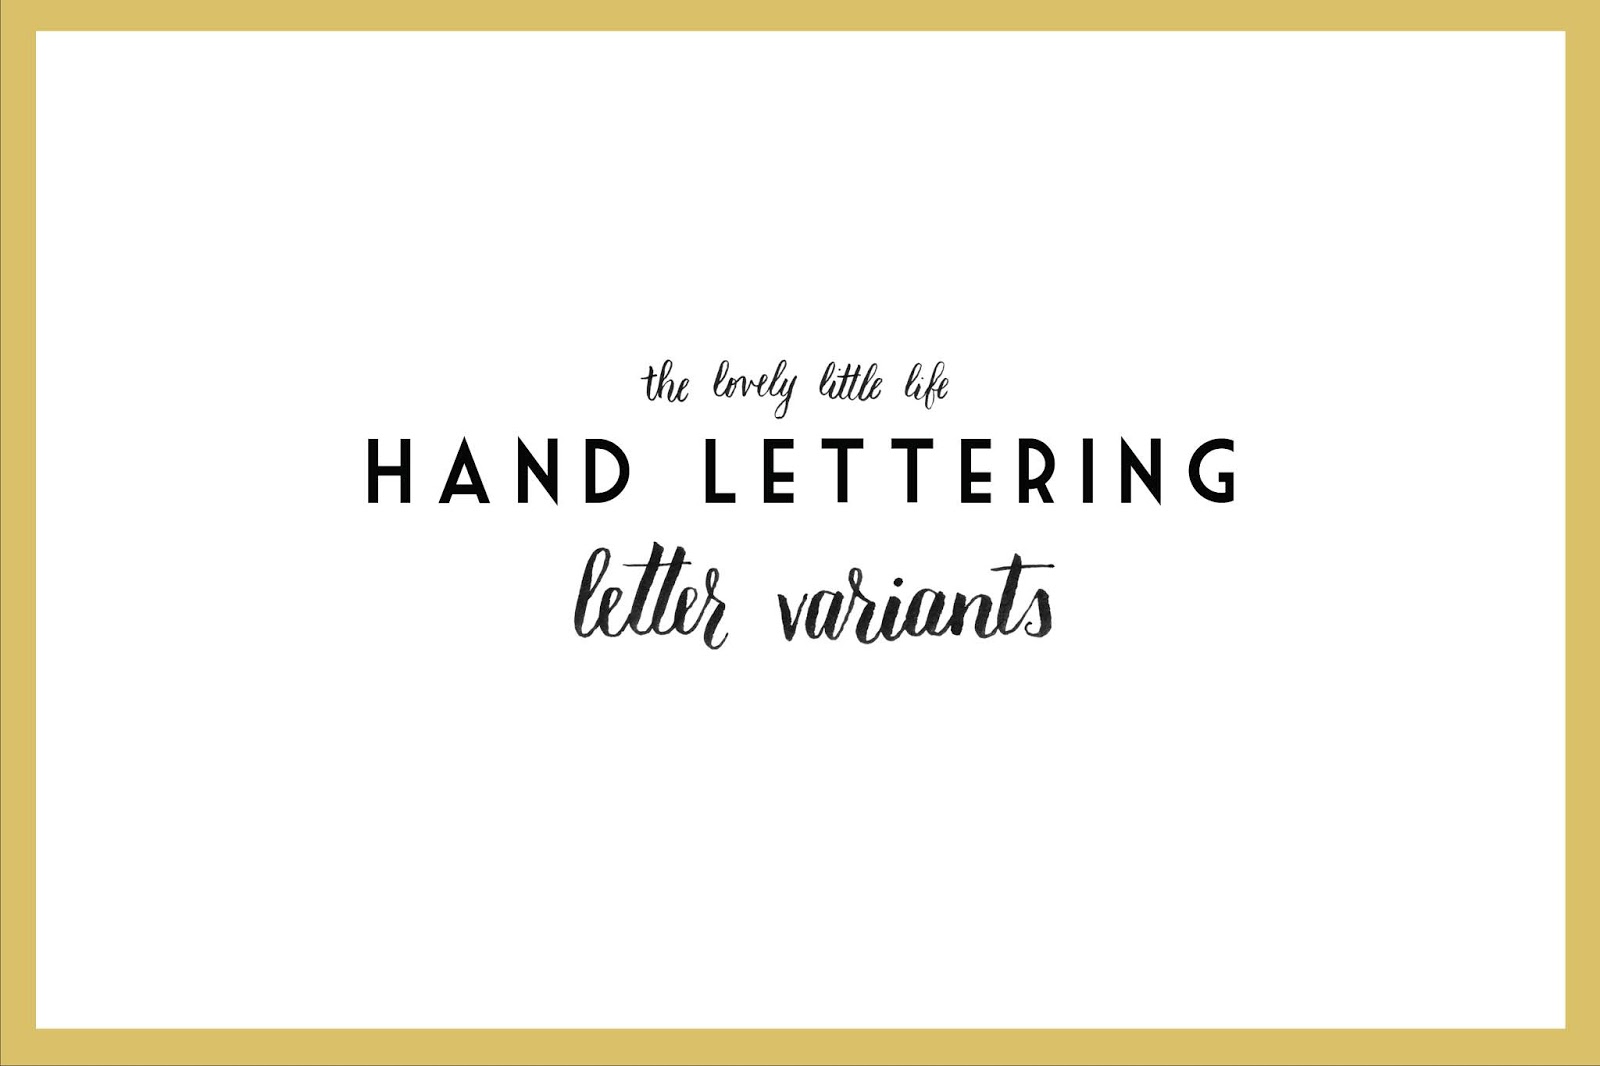 Hand Lettering with Variants